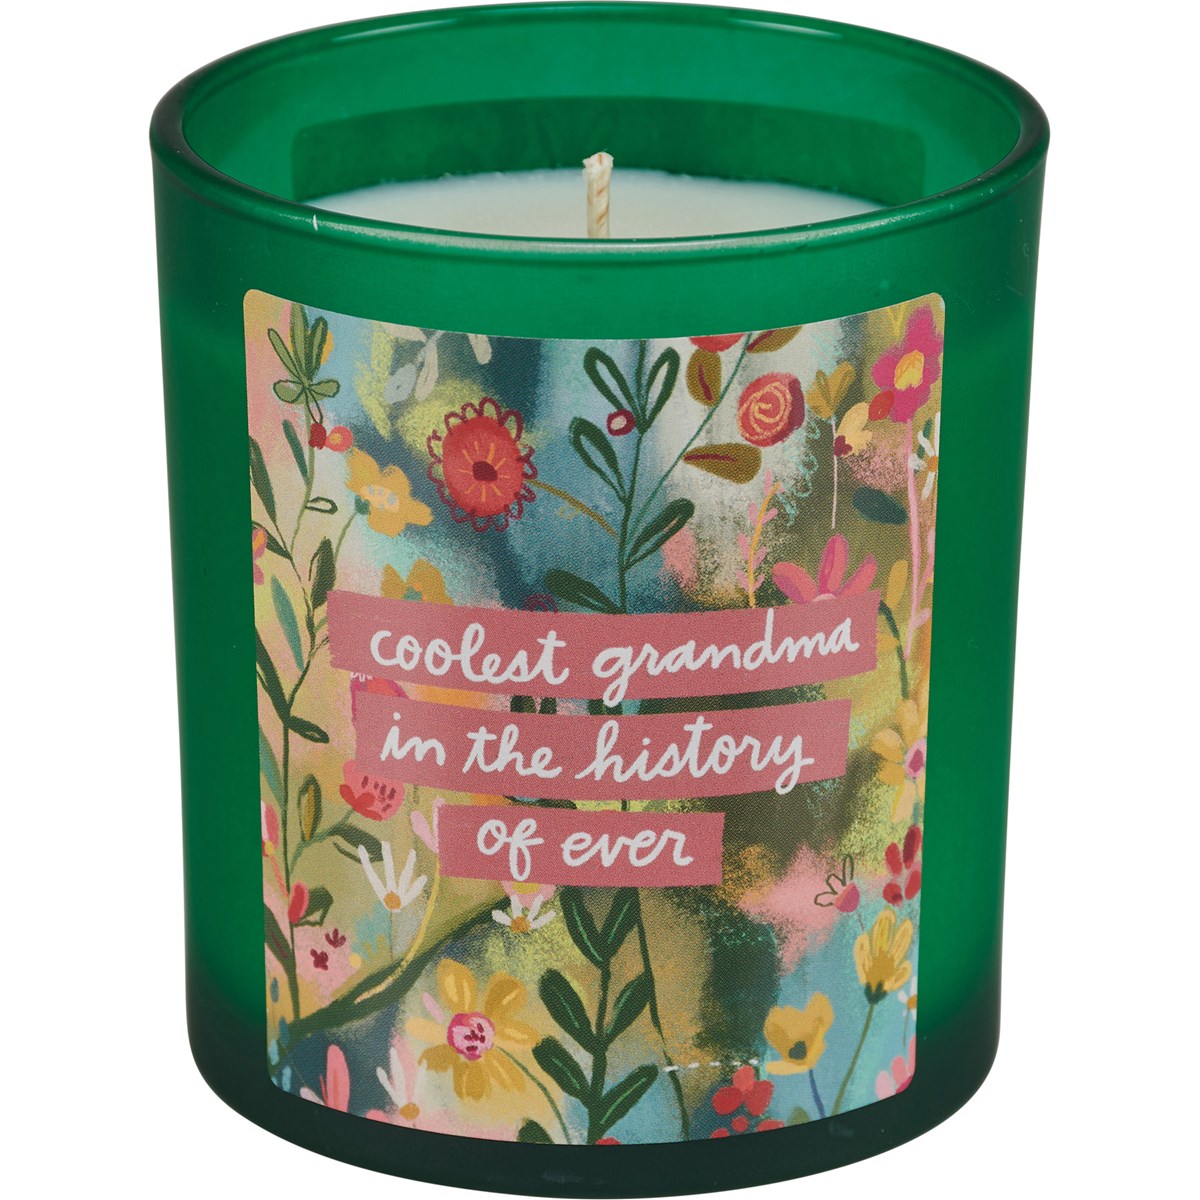 Coolest Grandma Candle - Soy Wax, Glass, Cotton